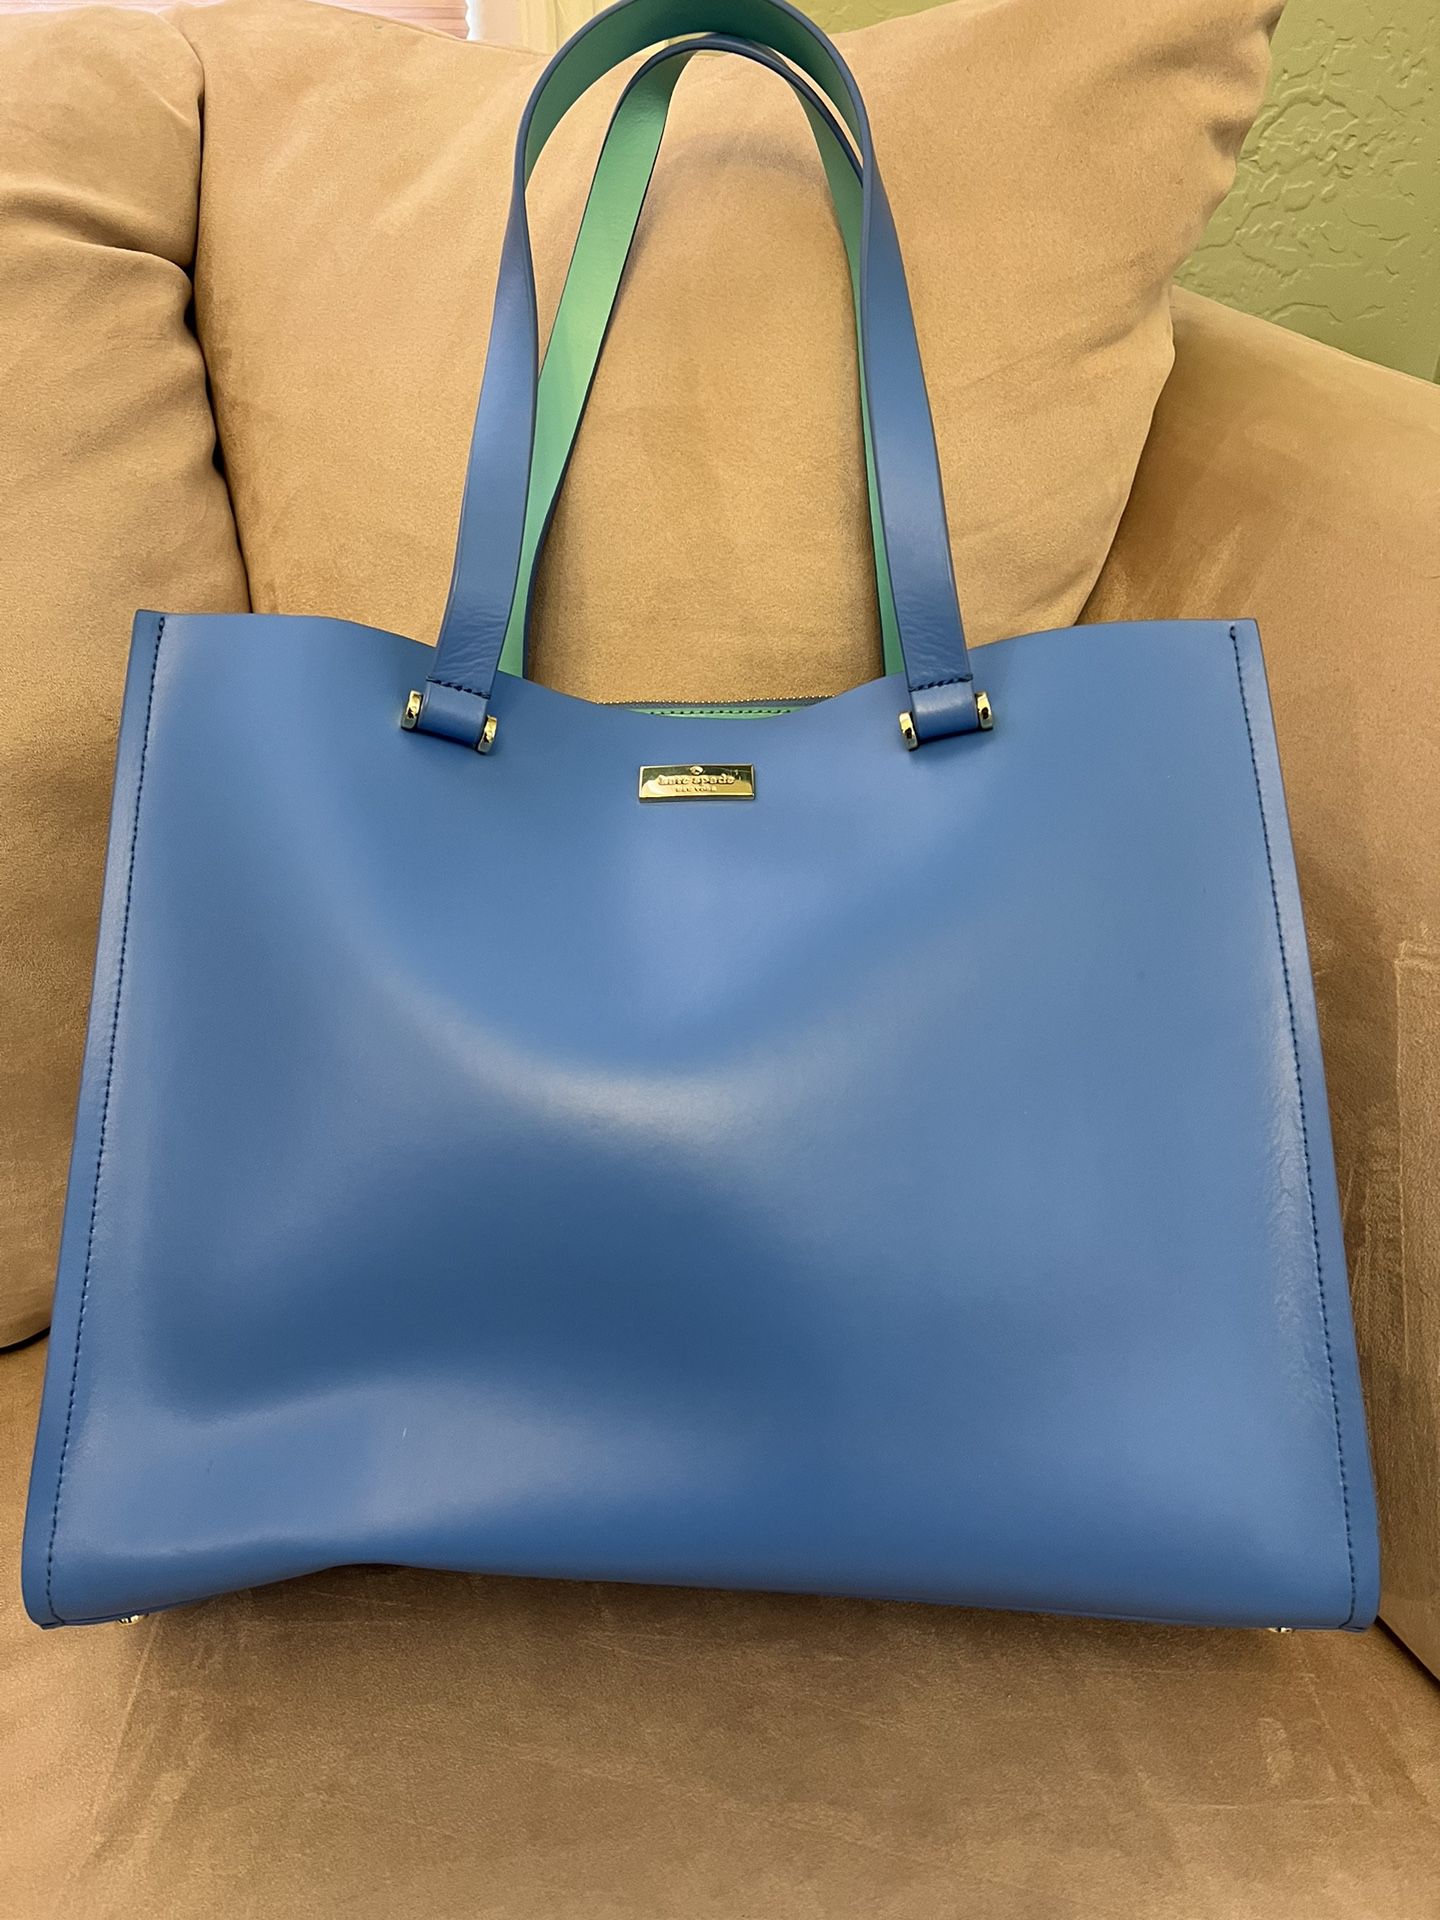 Kate Spade Periwinkle And Aqua Tote for Sale in Prescott Valley, AZ -  OfferUp